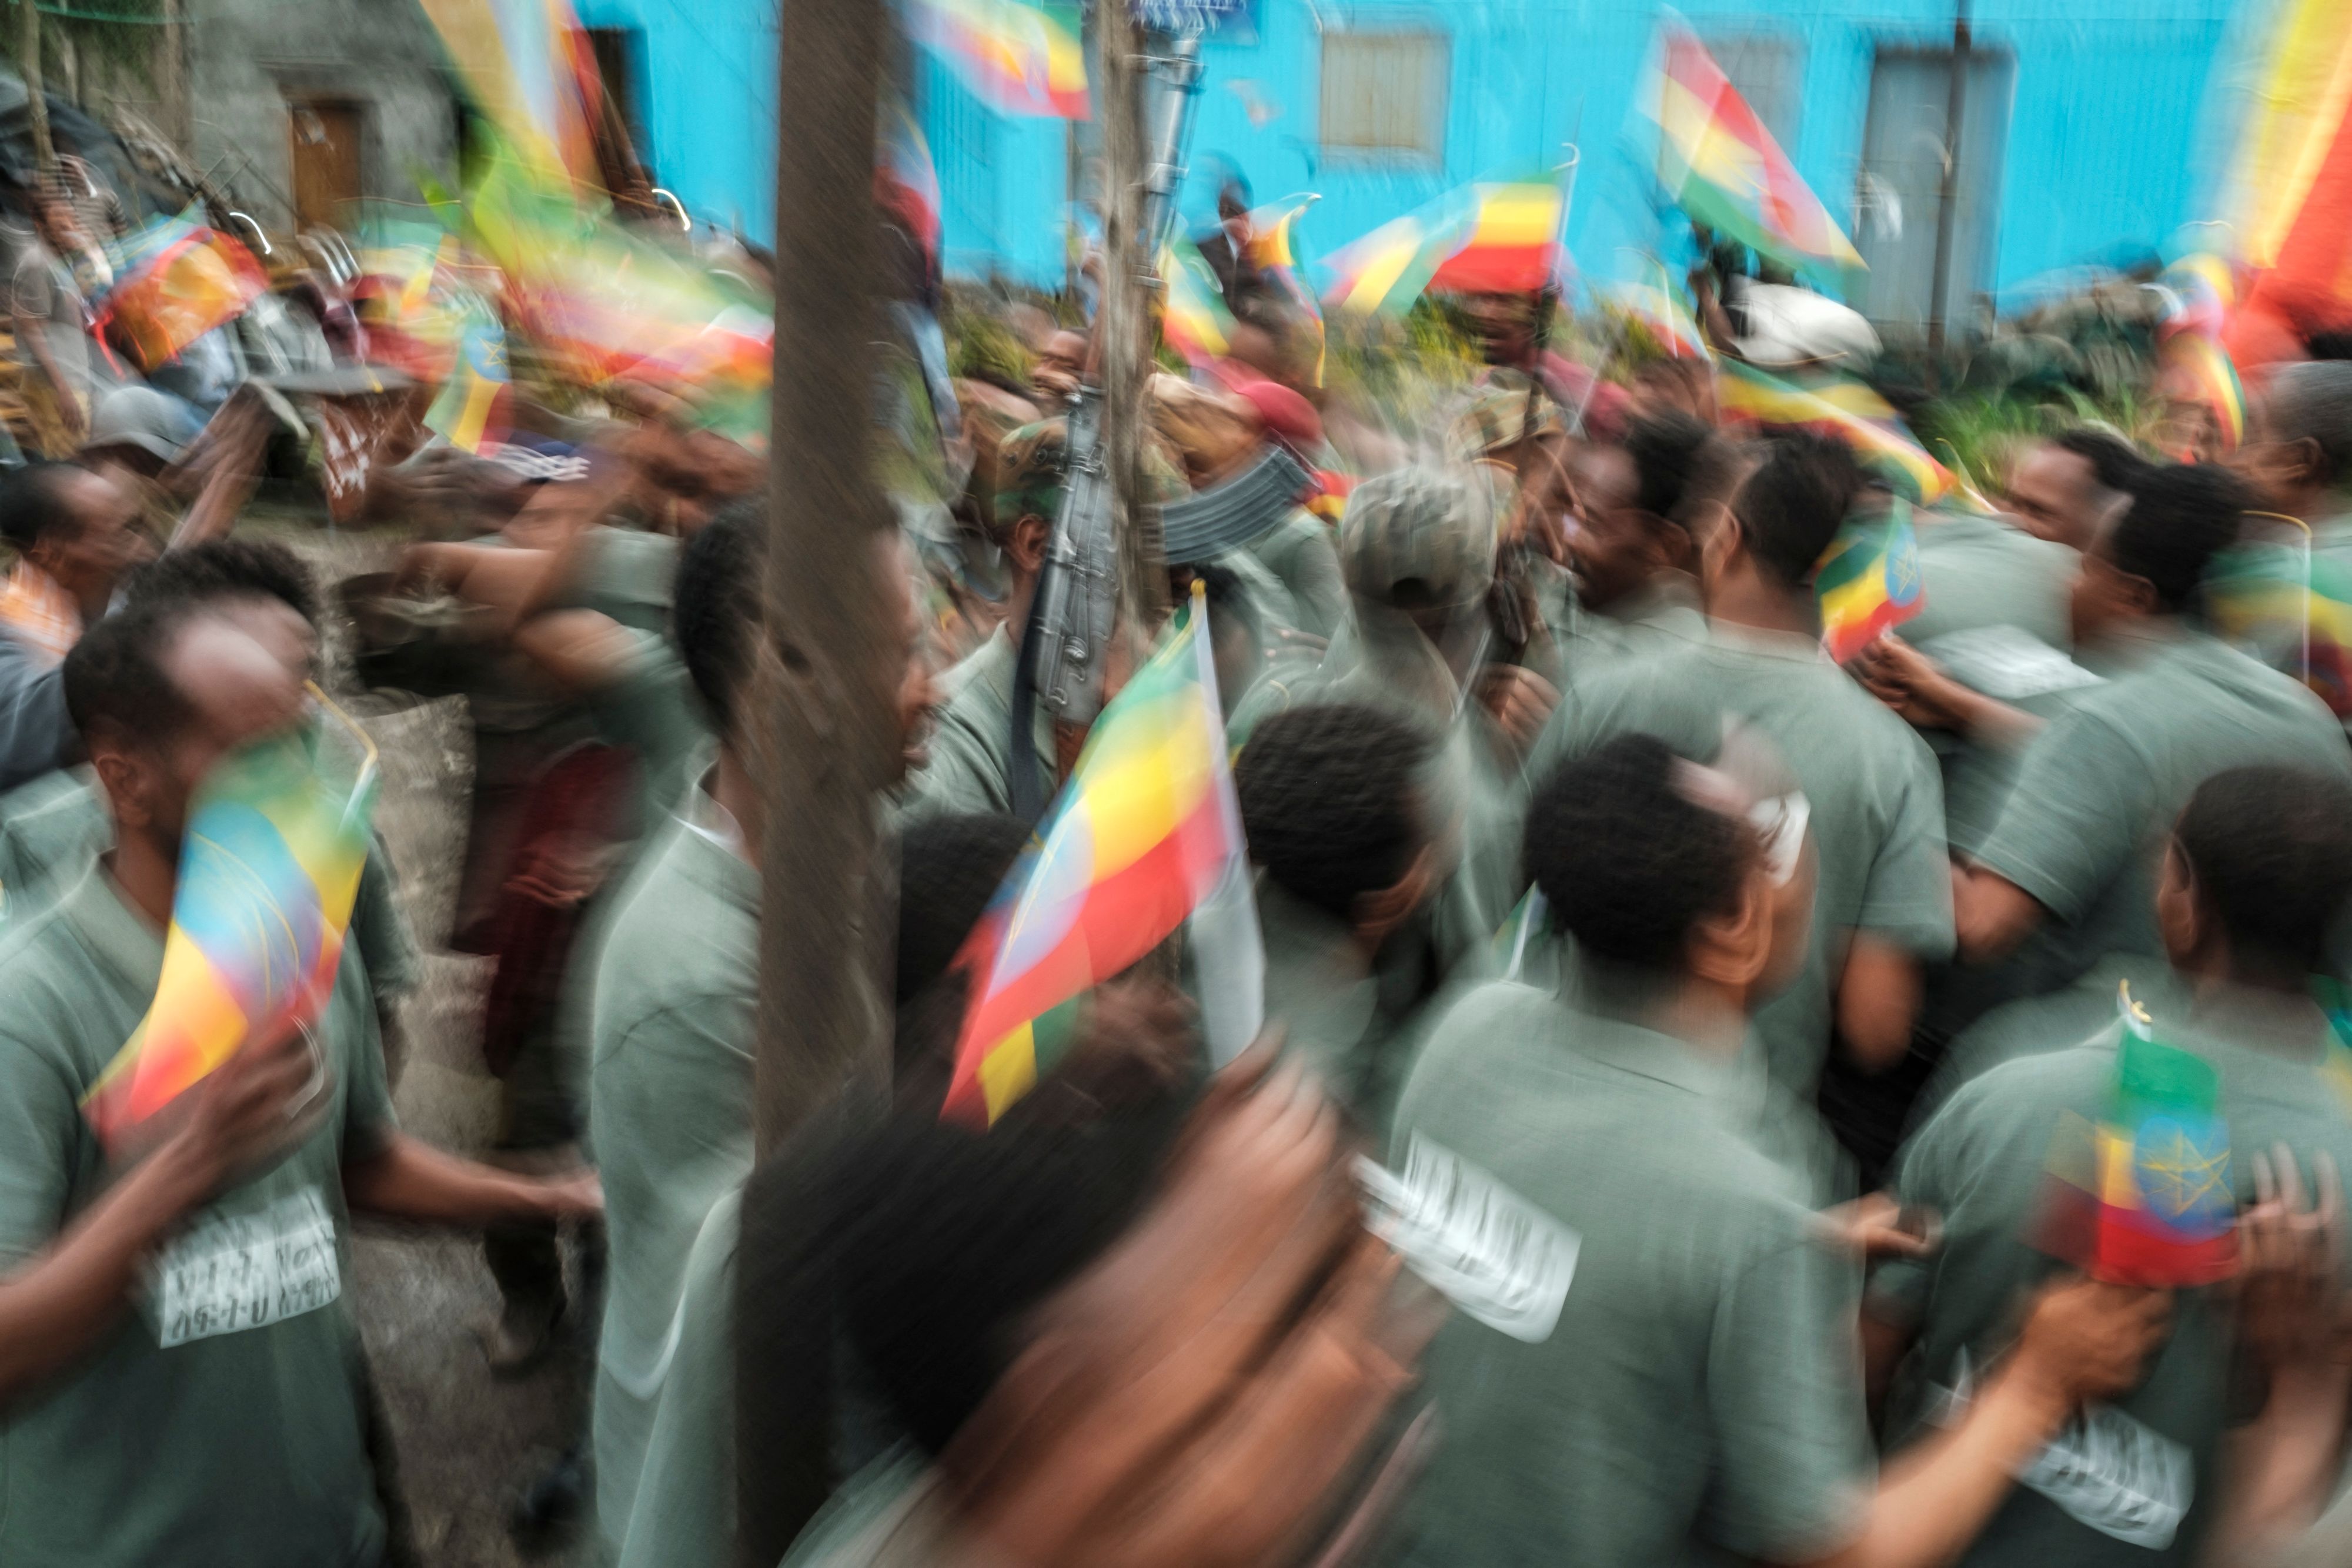 Long confined to Tigray, the conflict in Ethiopia has recently spread to neighboring regions&nbsp;Afar and Amhara.